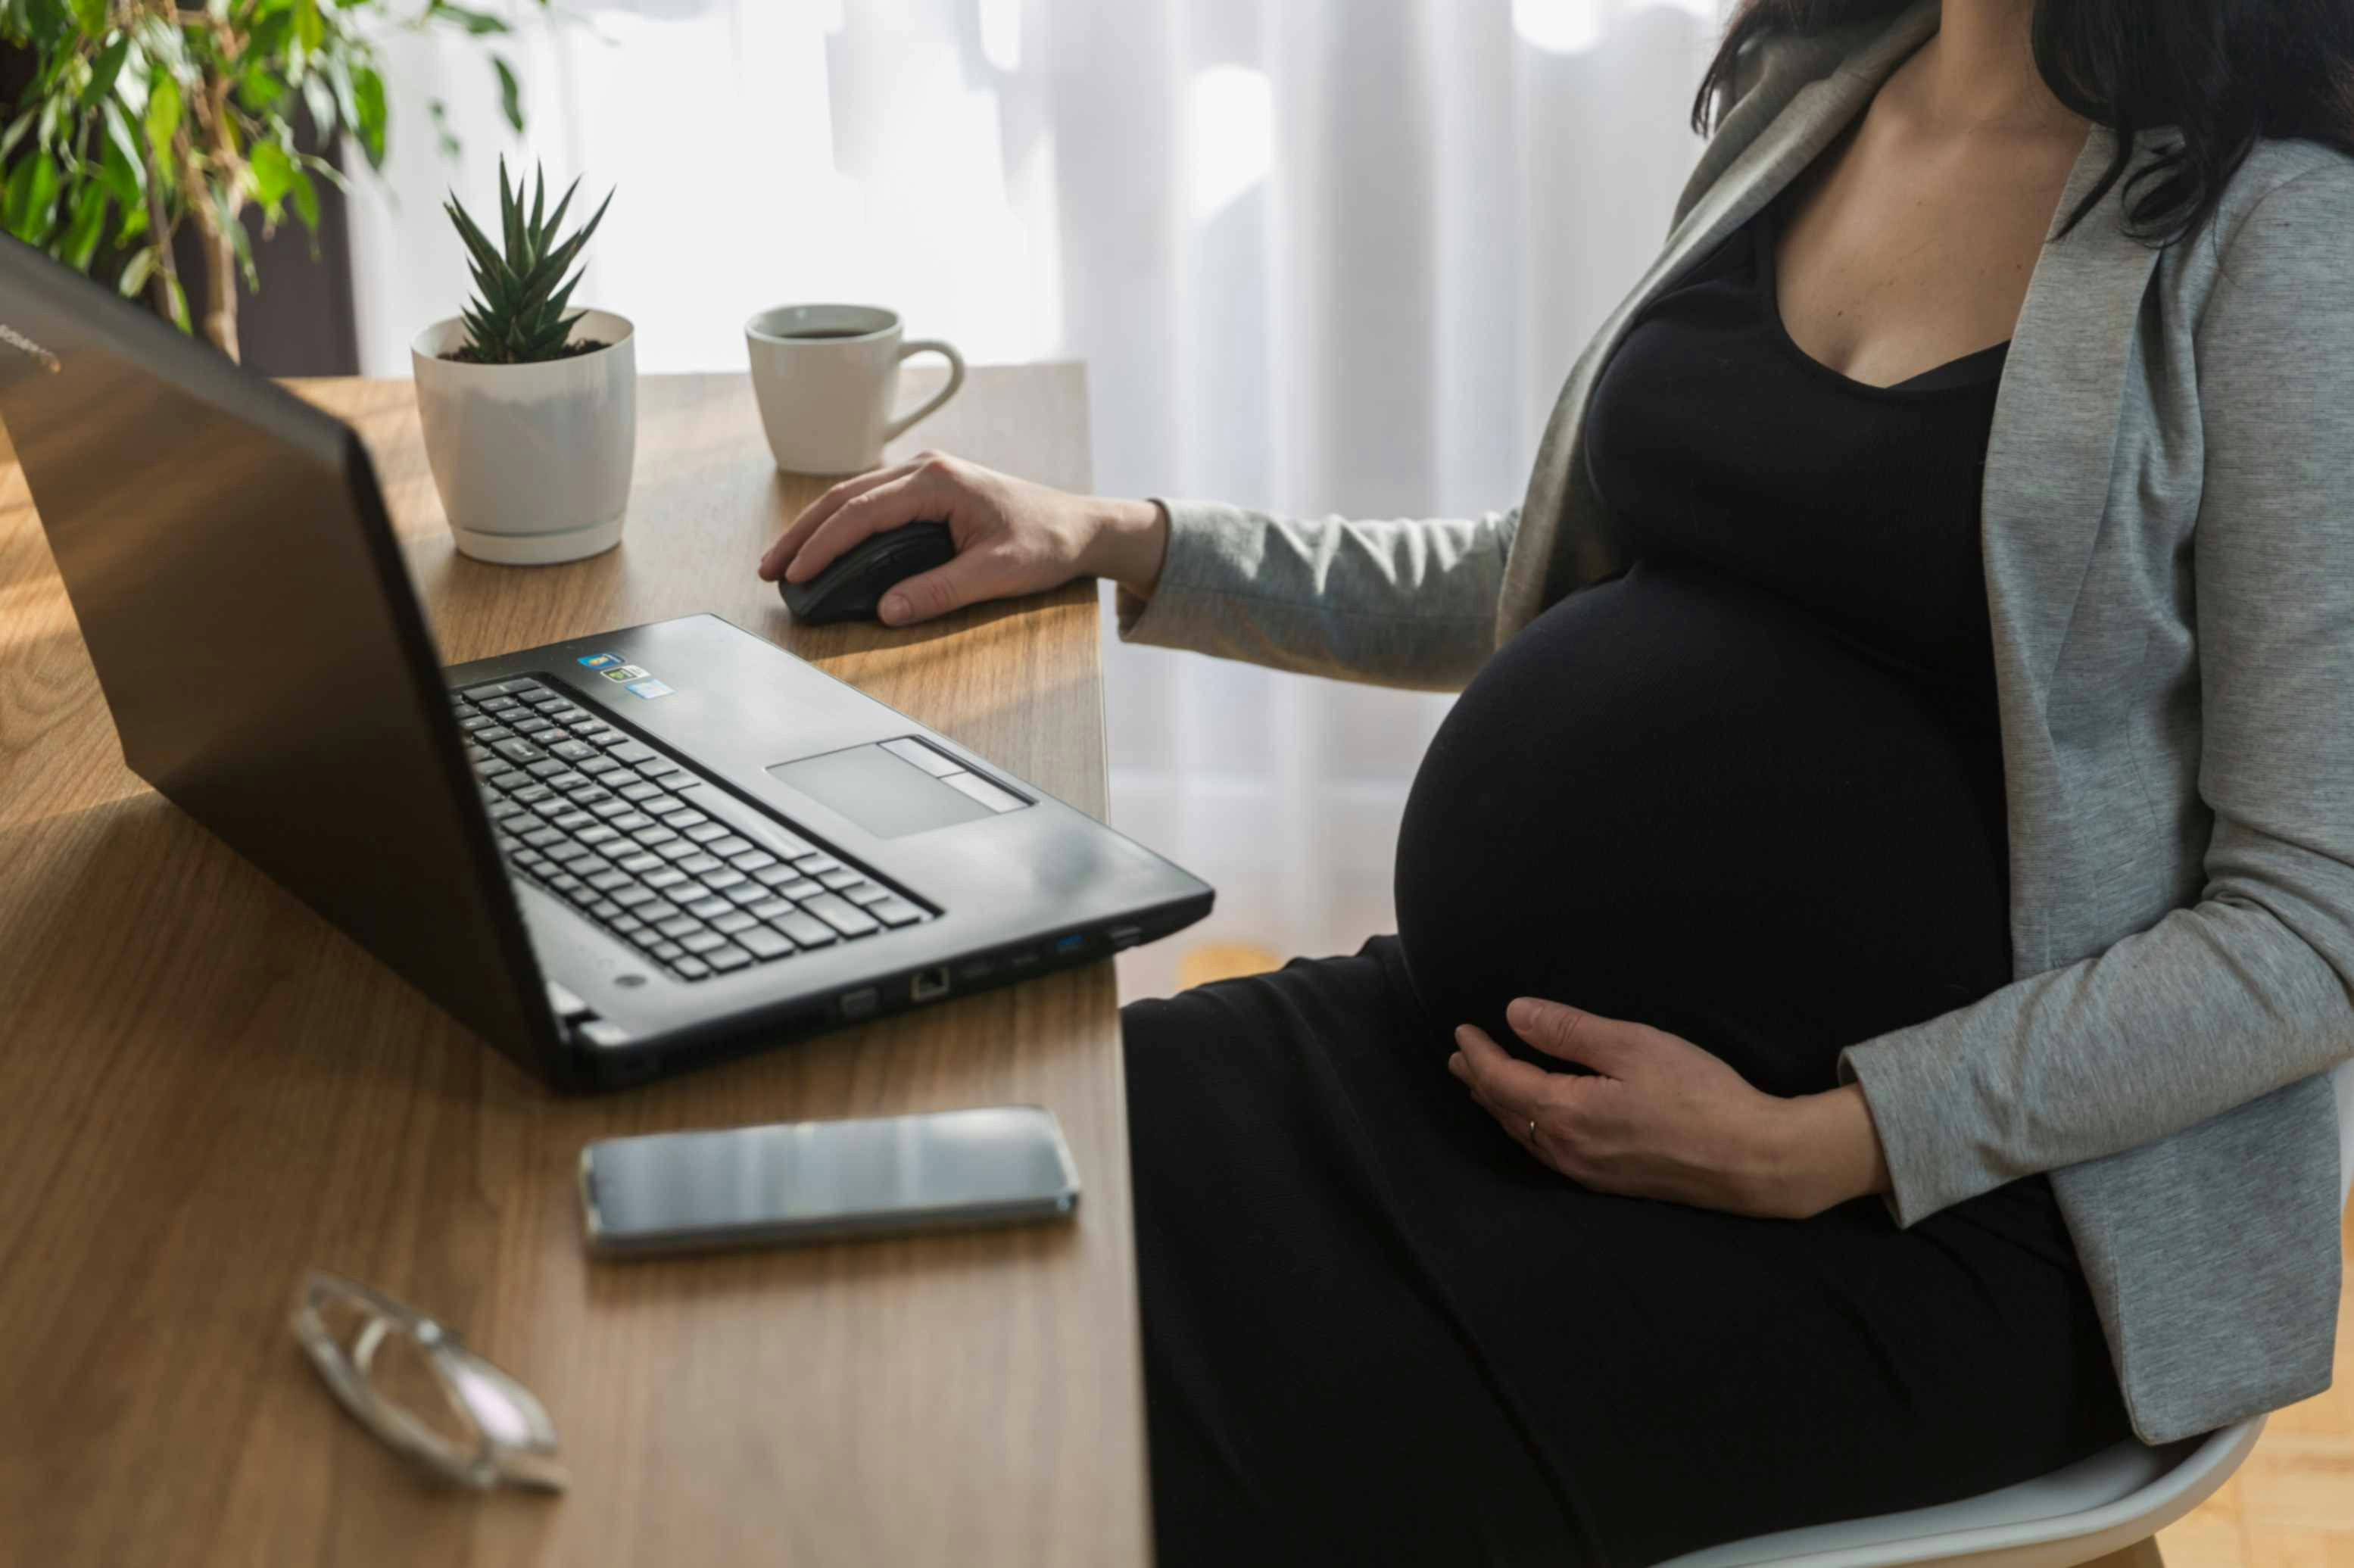 A pregnant employee at her desk with her laptop and phone.